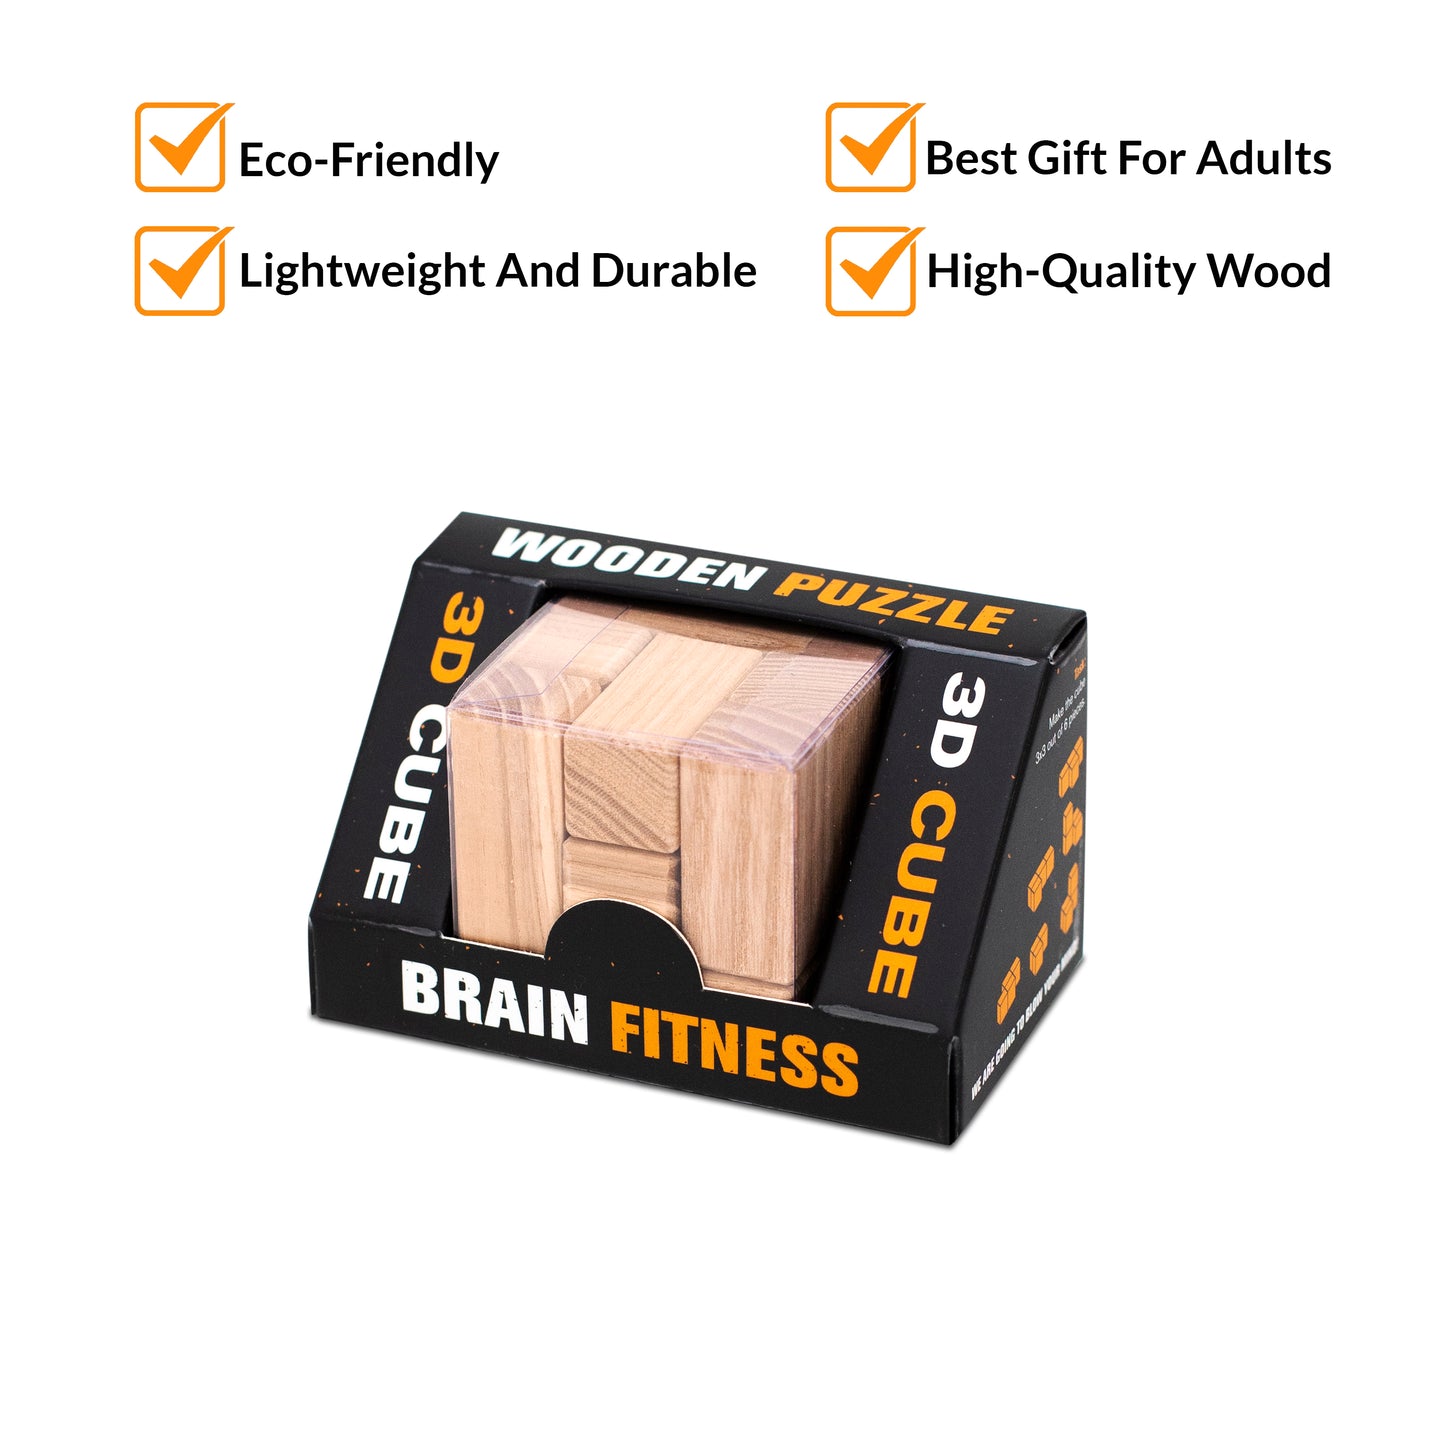 Wooden Cube Puzzle, 3D Wooden Puzzles for Adults, Brain Test Puzzle (5x5x5 cm) or (2x2x2 in)